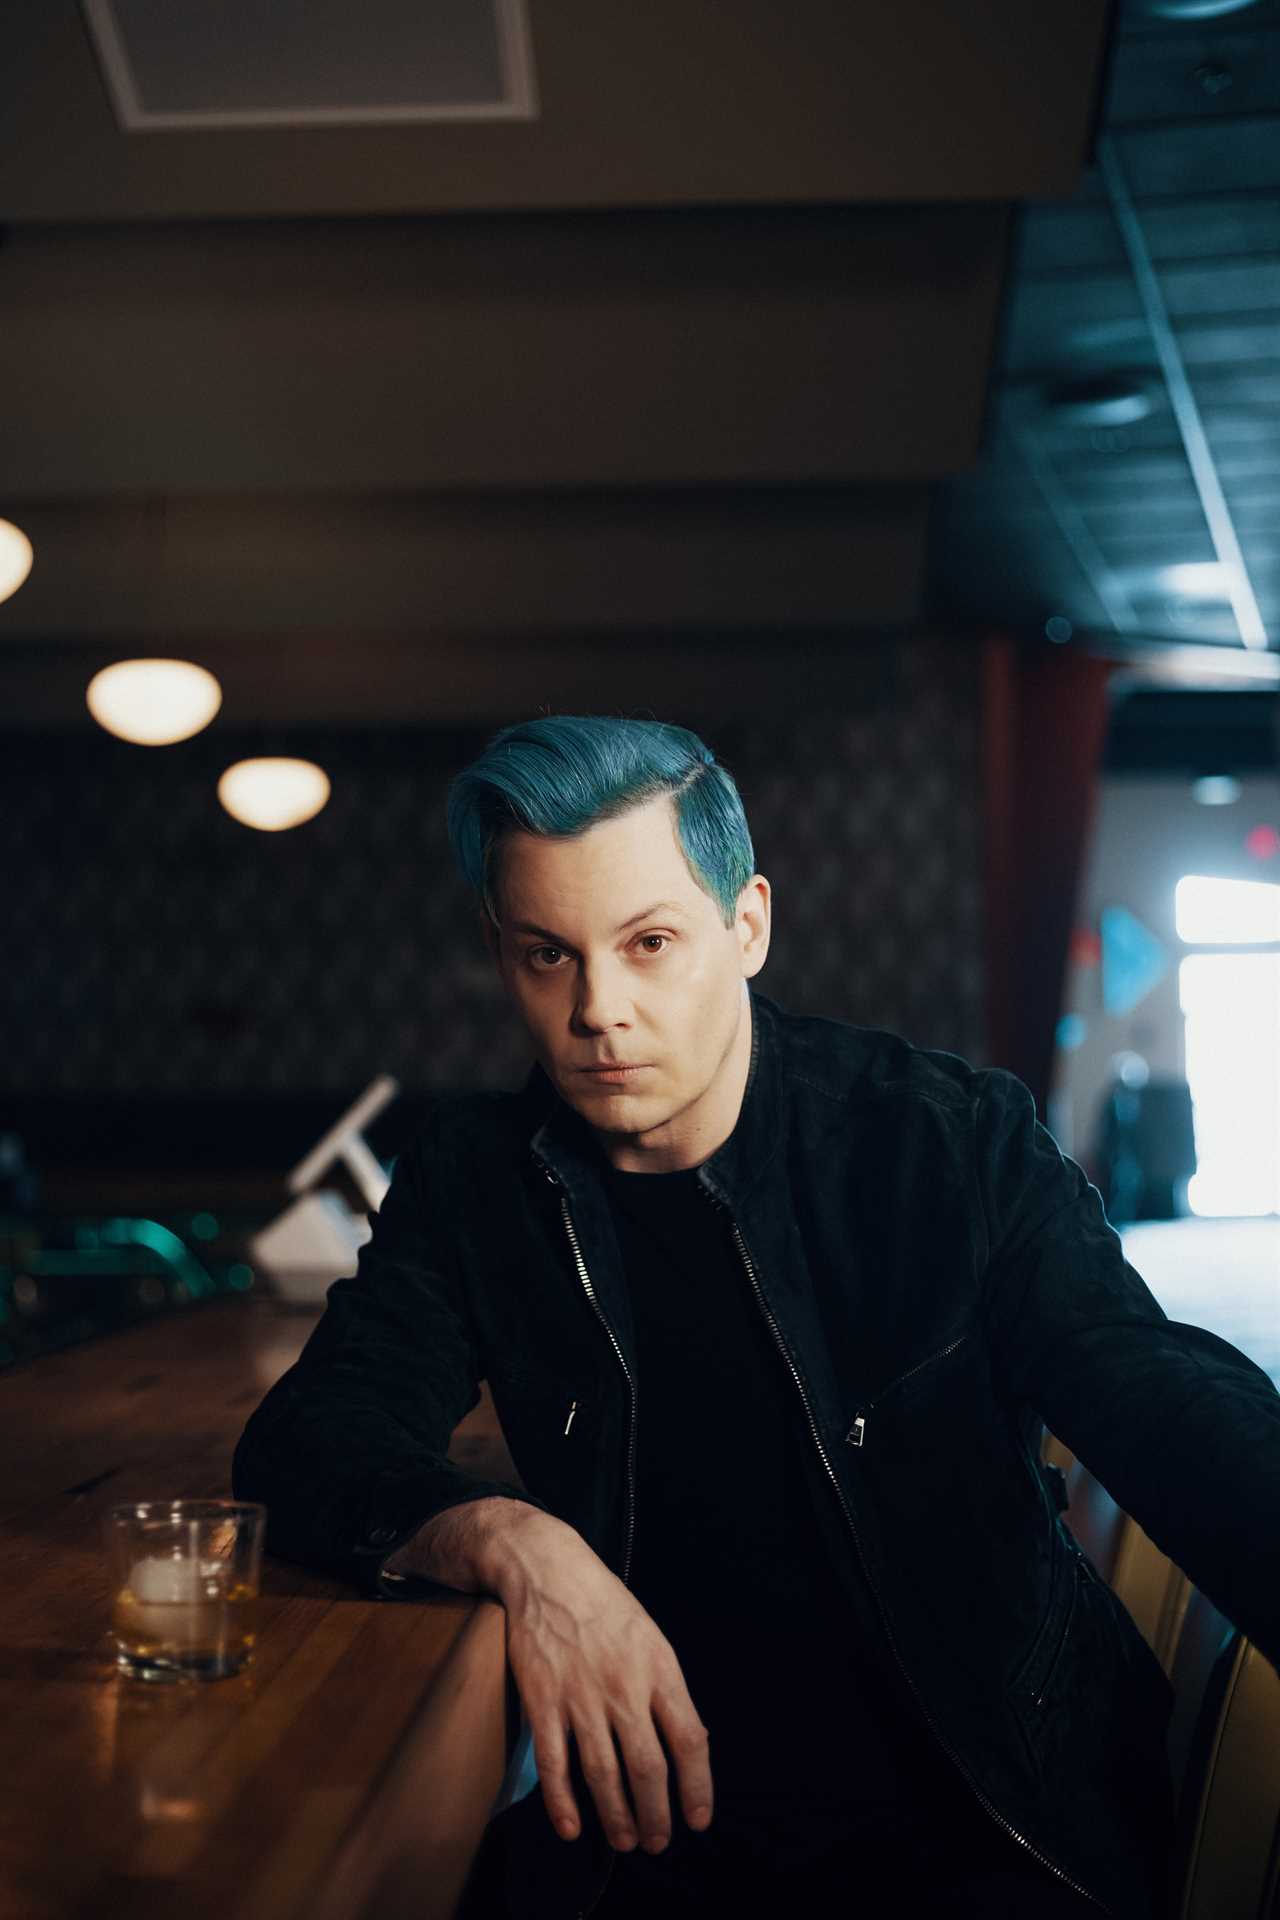 It takes a lot of work to get this hair, says Jack White